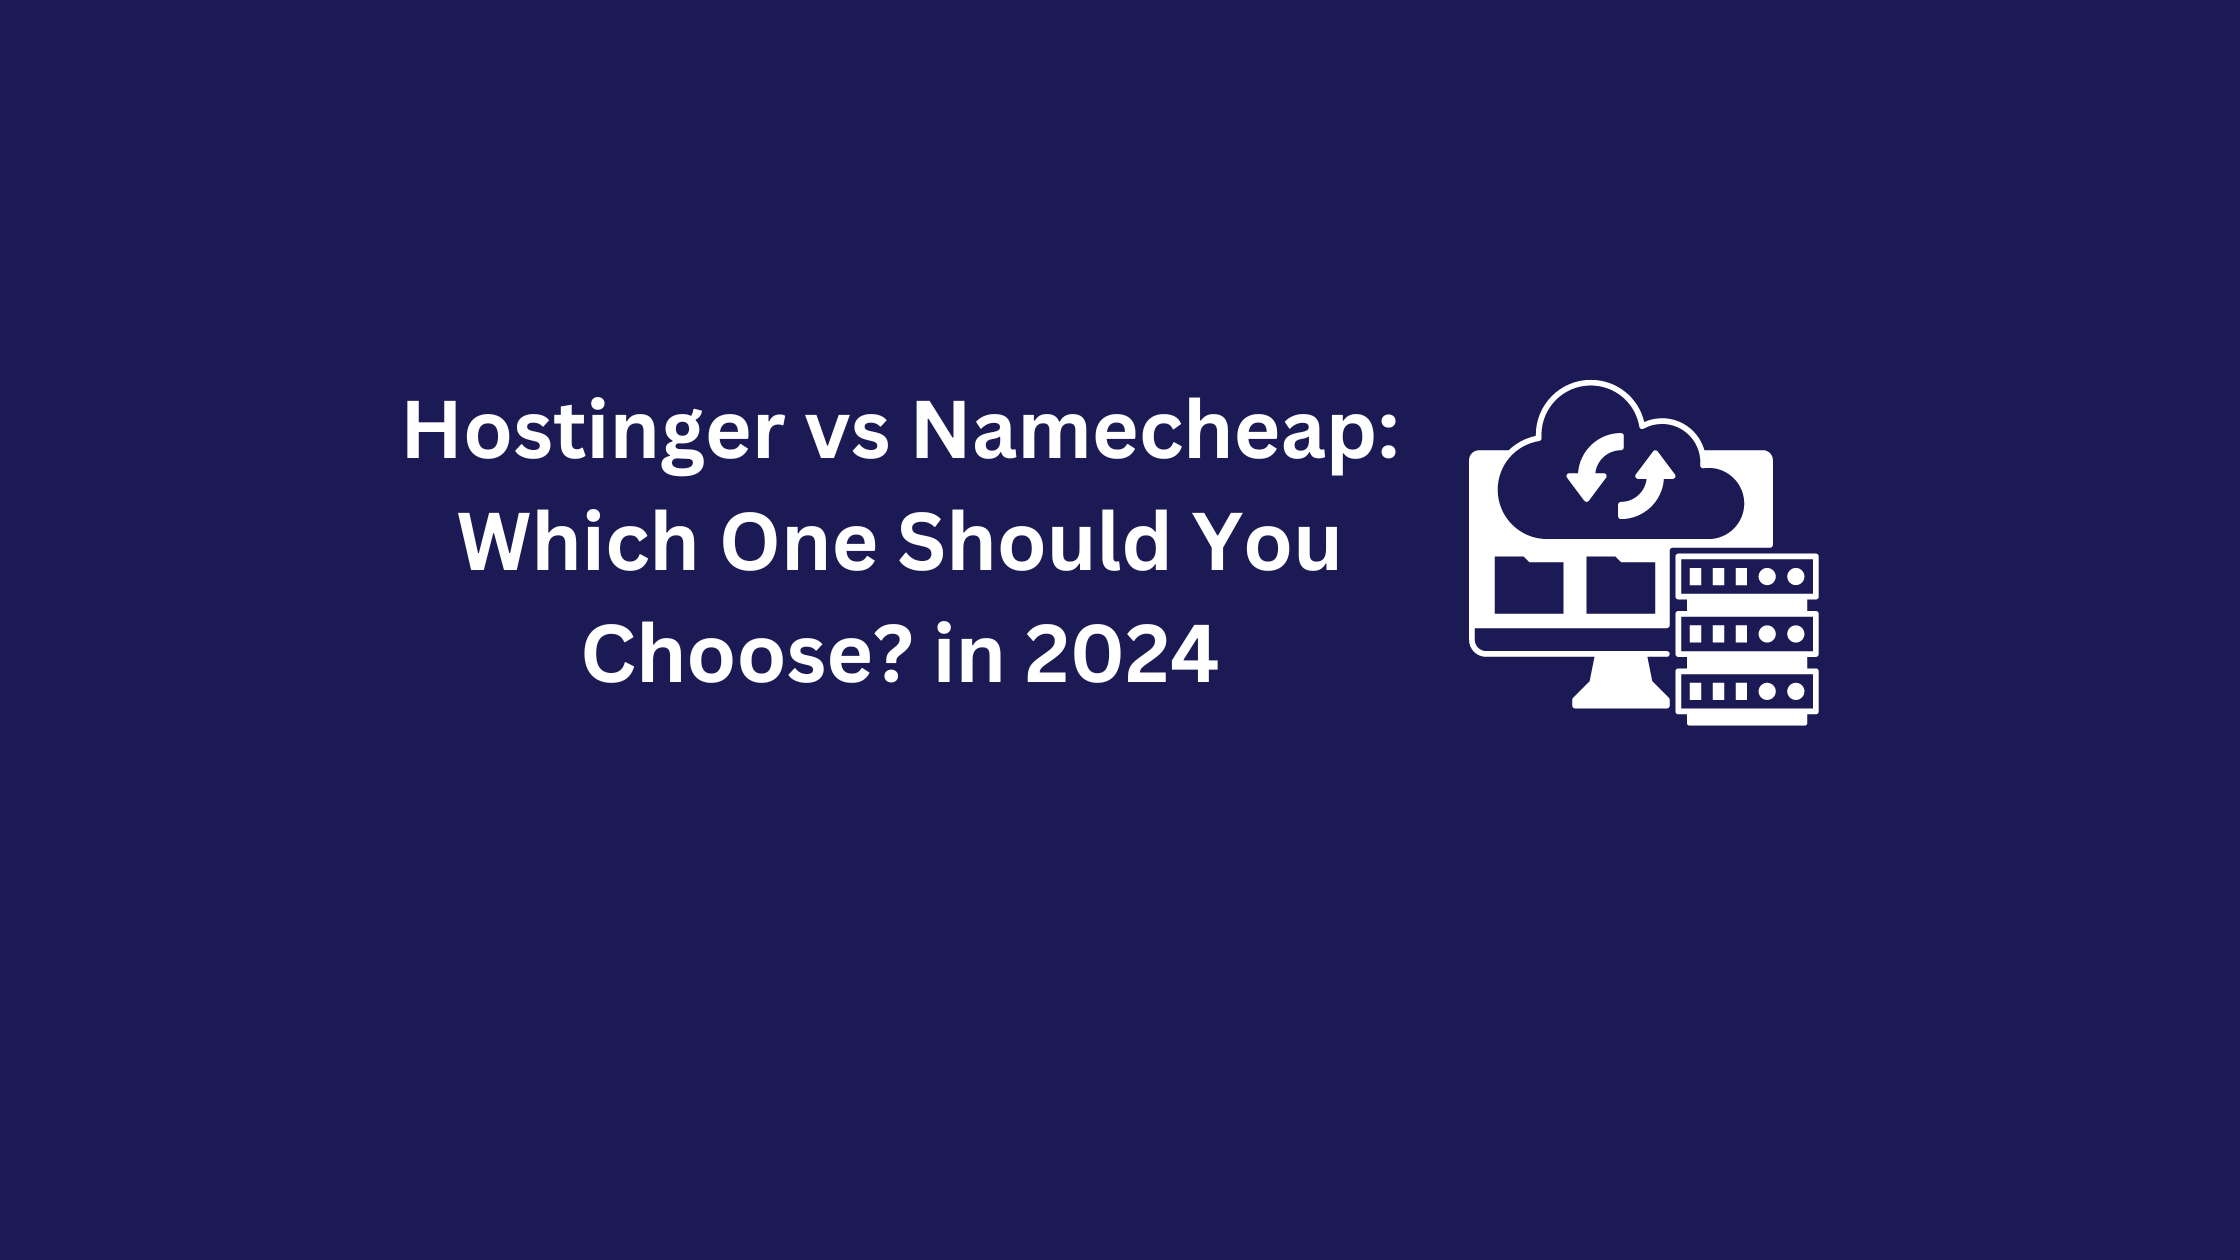 Hostinger vs Namecheap: Which One Should You Choose? in 2024